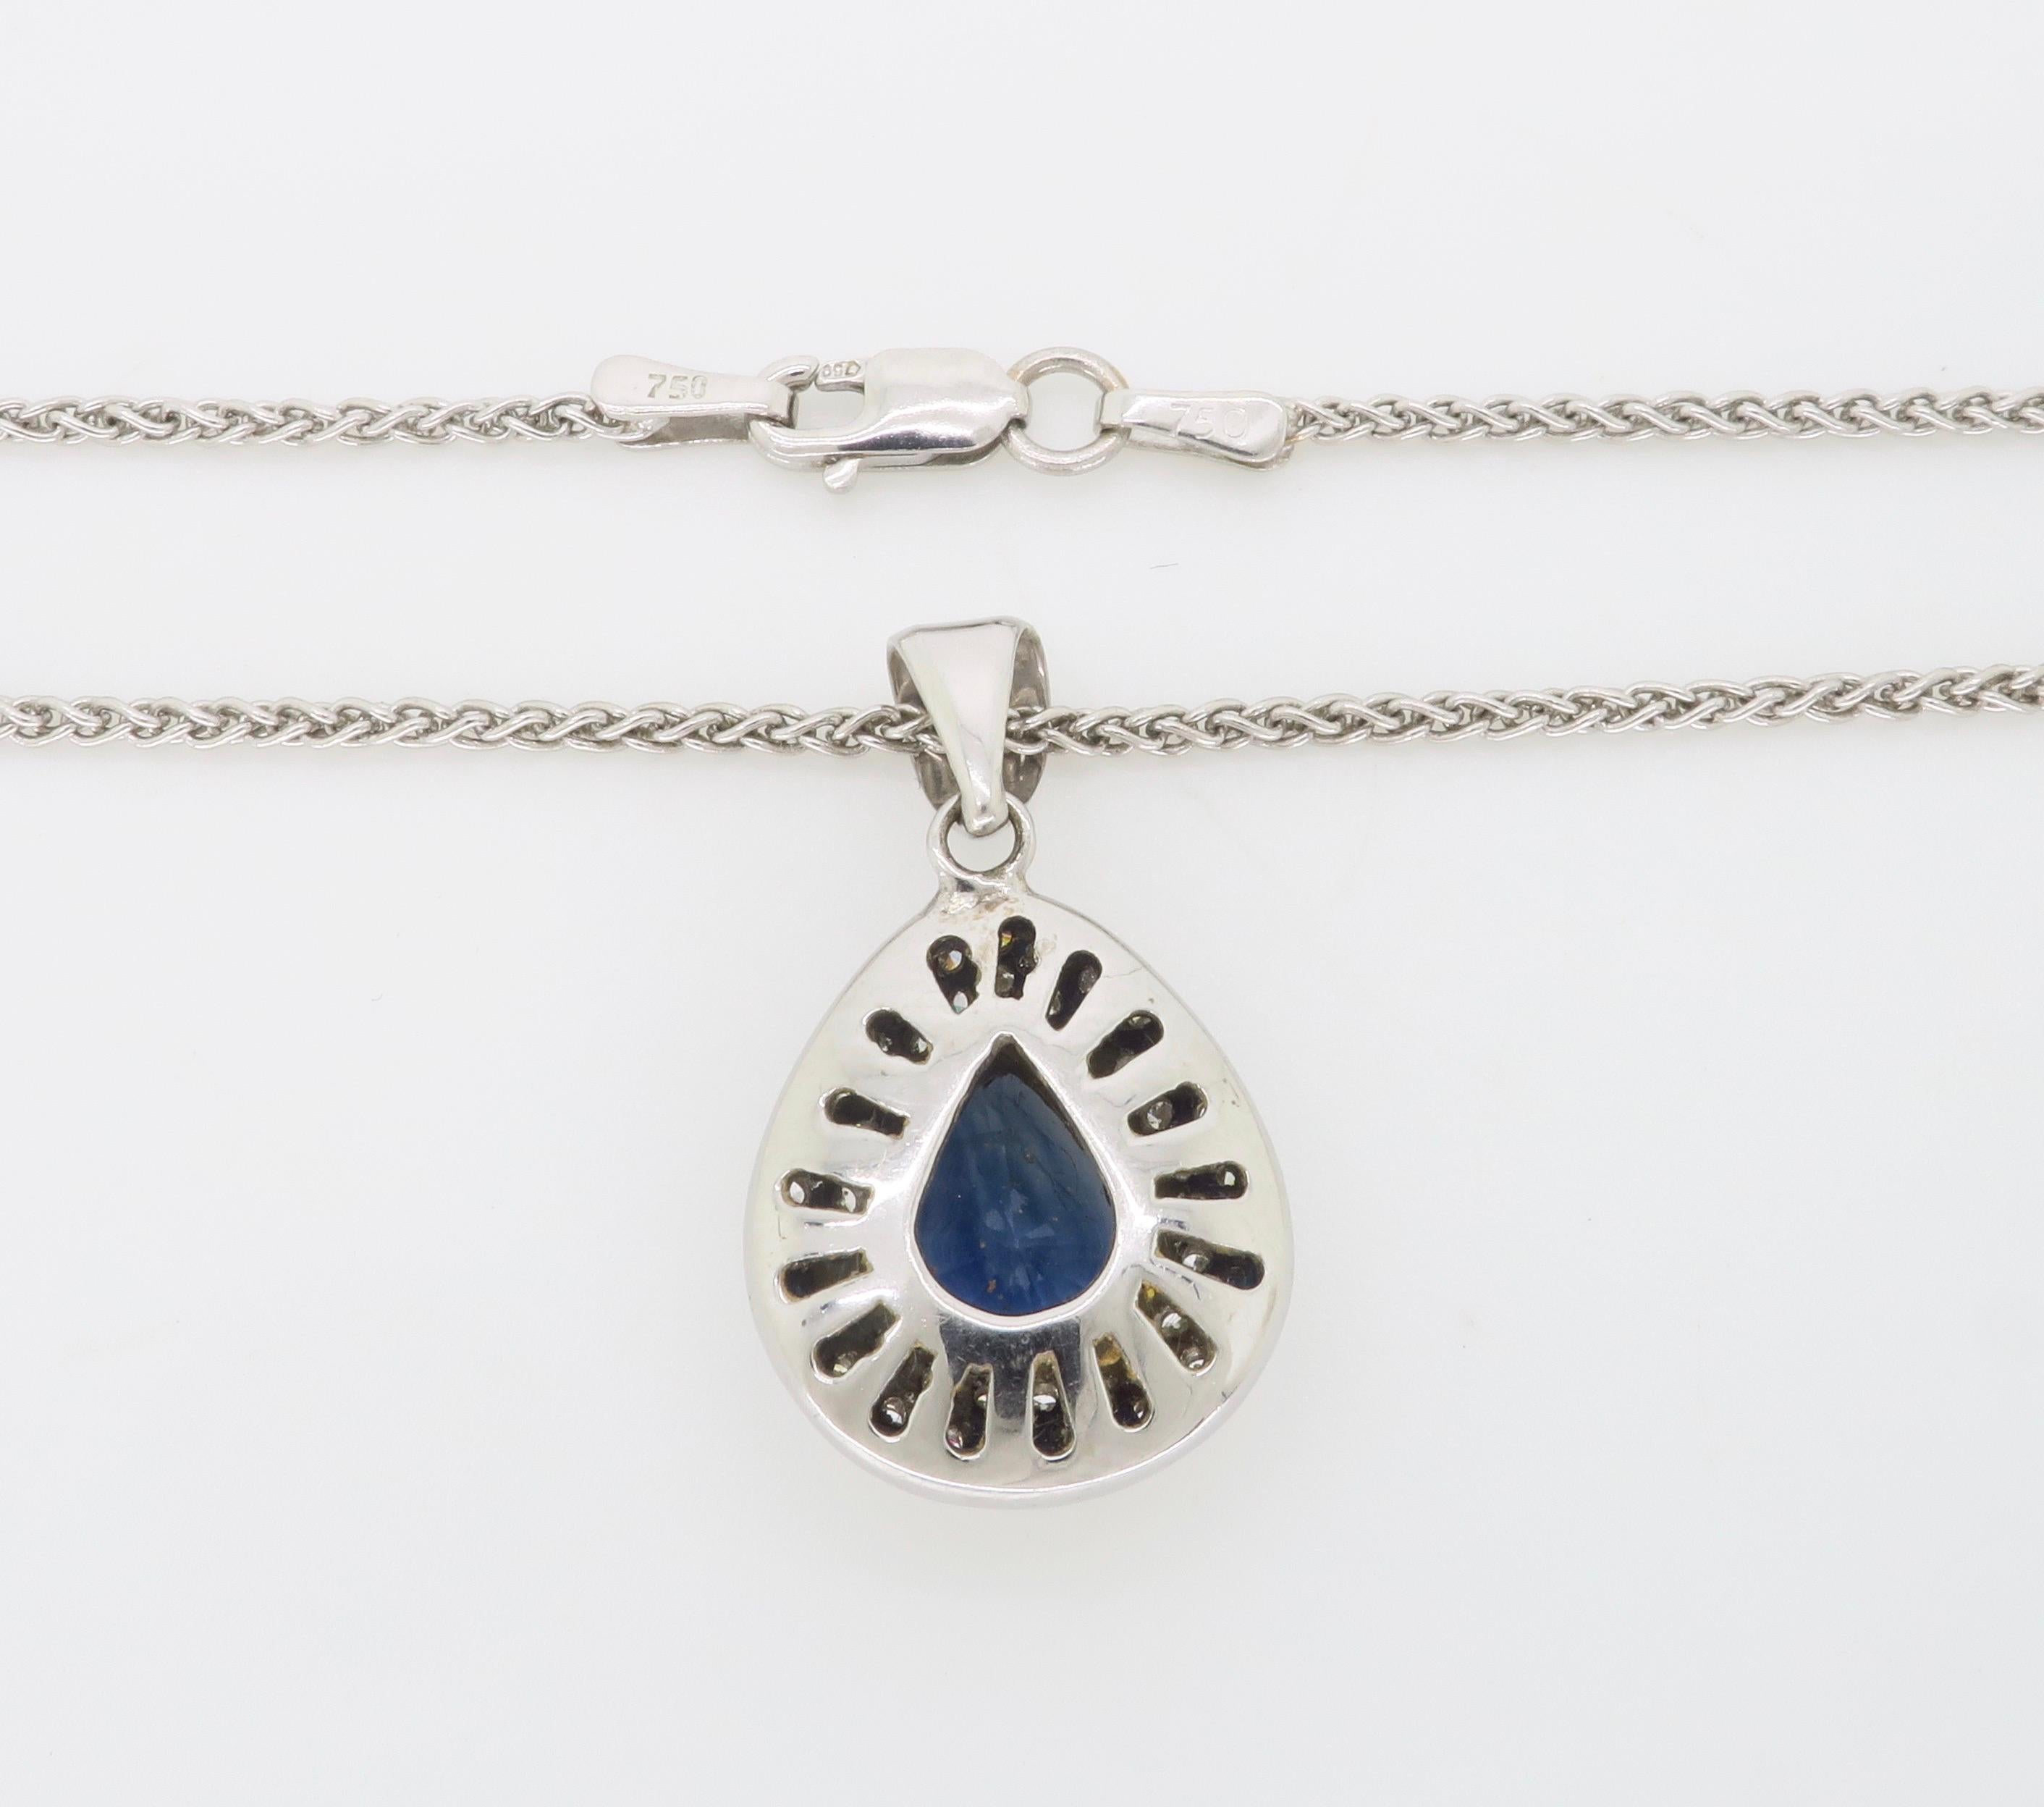 Blue Sapphire & Diamond Halo Pendant Necklace in 18k In Excellent Condition For Sale In Webster, NY